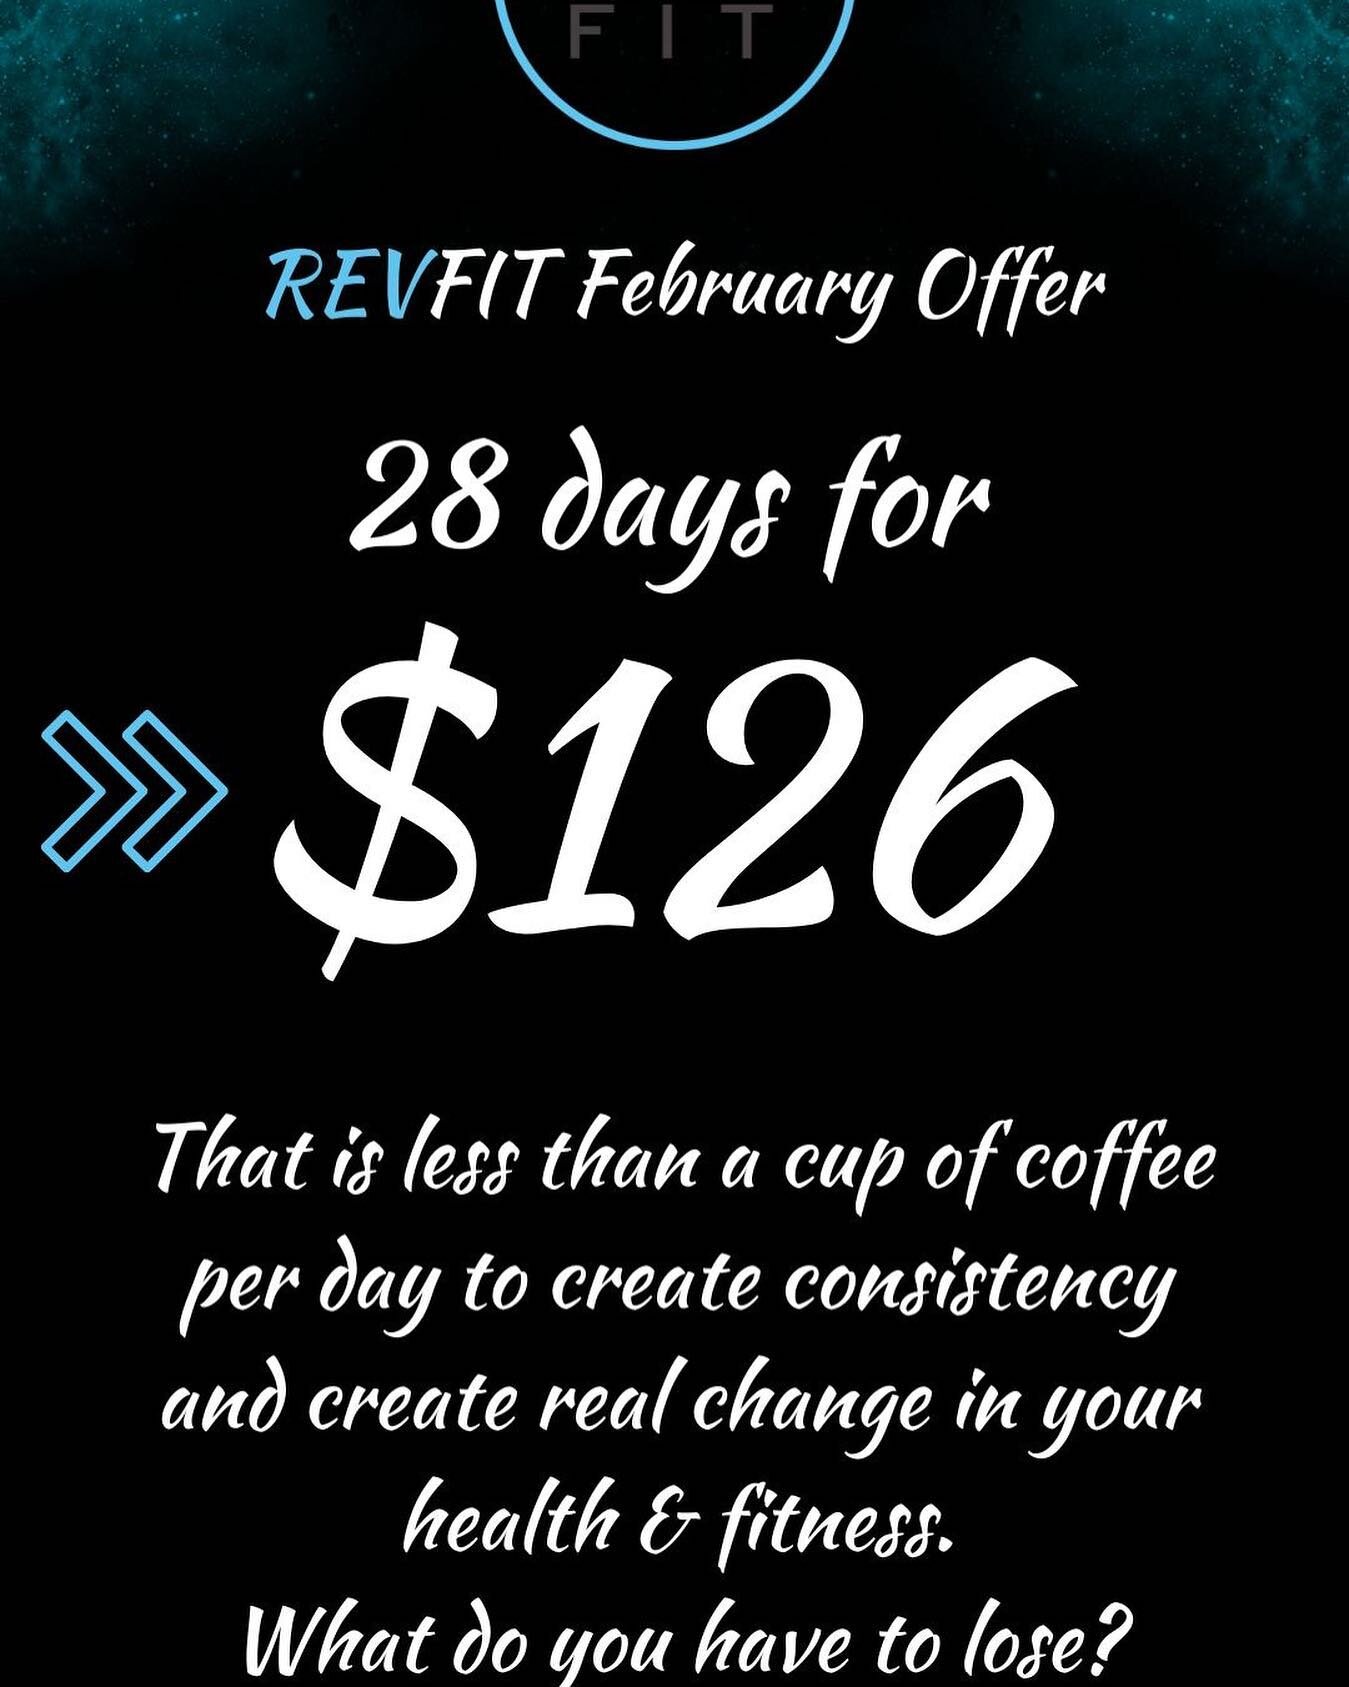 For less than $5 per day. You&rsquo;d be crazy to miss this deal.
If you have ever wanted to see what we do here, now is your chance! 

Limited numbers available.
#fitness #tamworth #tamworthnsw #coaching